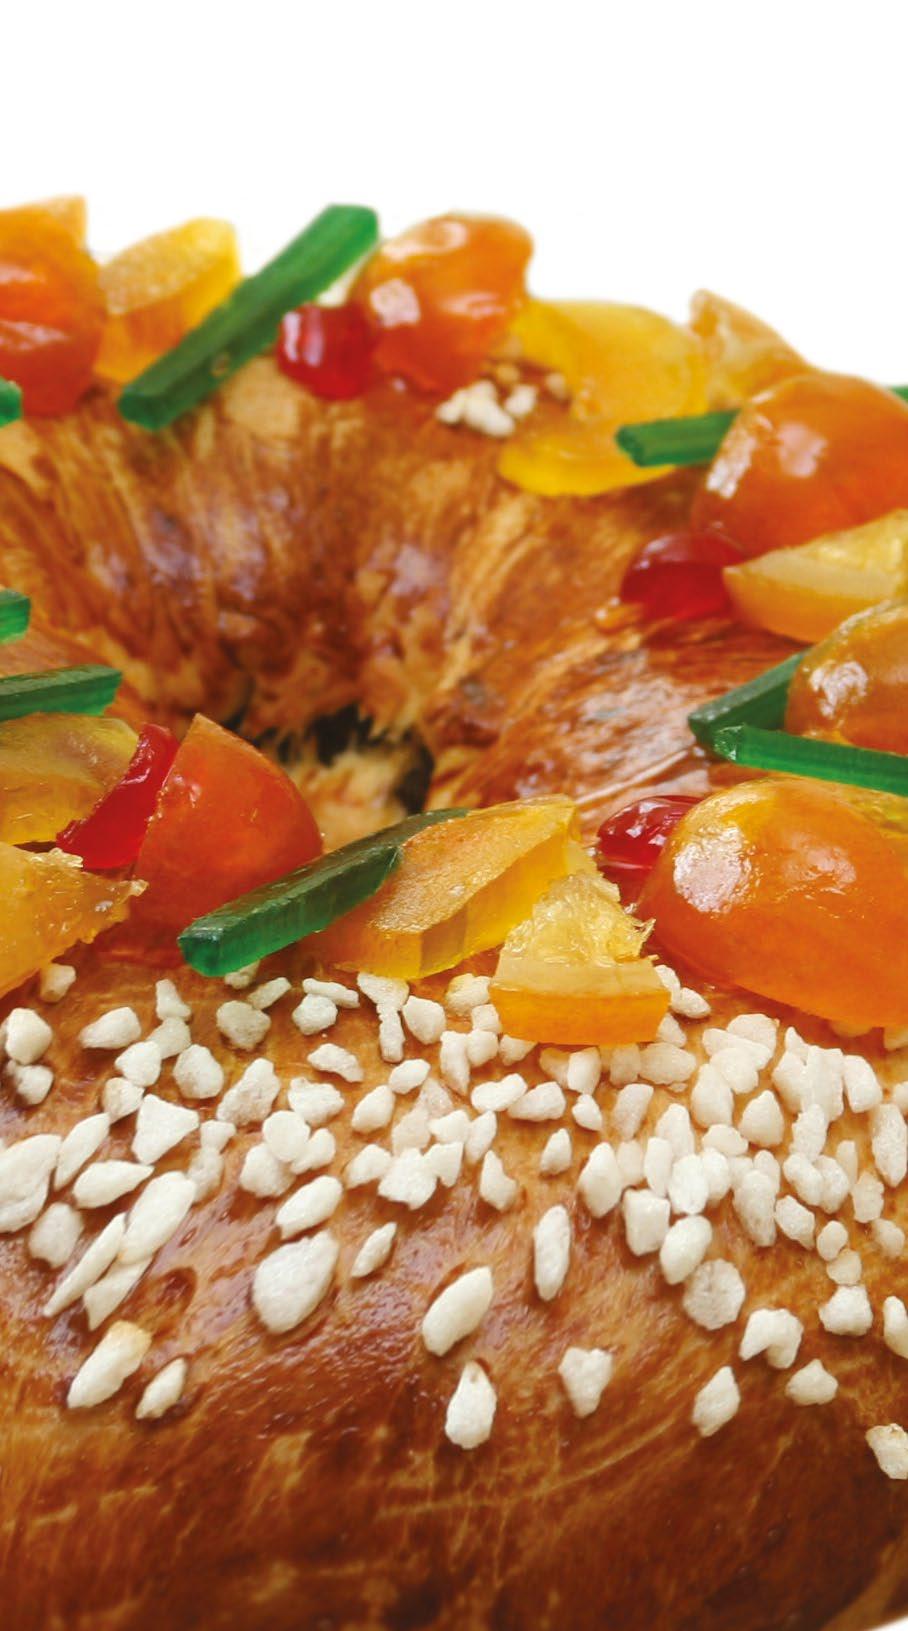 Candied Fruit Gluten The production of Candied Fruit is the company s core business. The processing method that has been handed down over the years, gradually acquired more and more refinement.